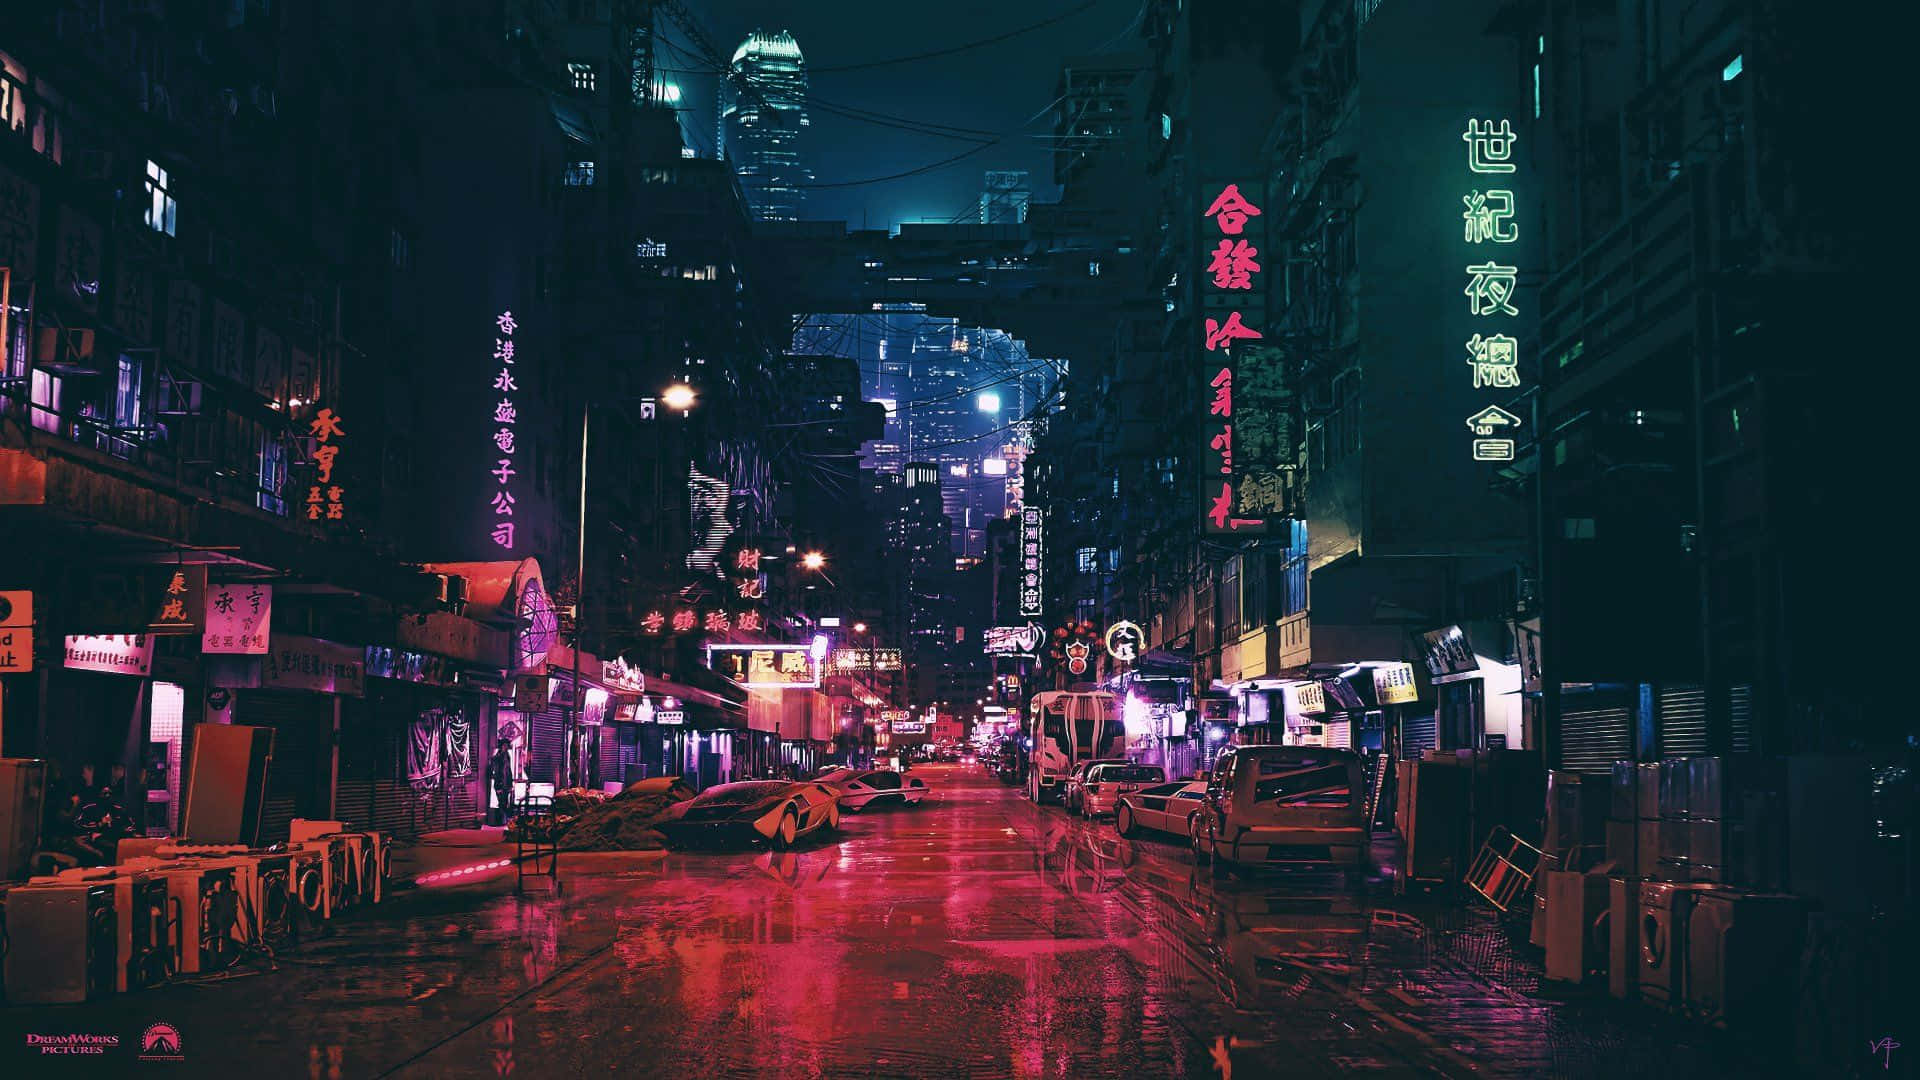 Dive into the Disruptive Tech-Filled Cyberpunk Aesthetic Wallpaper